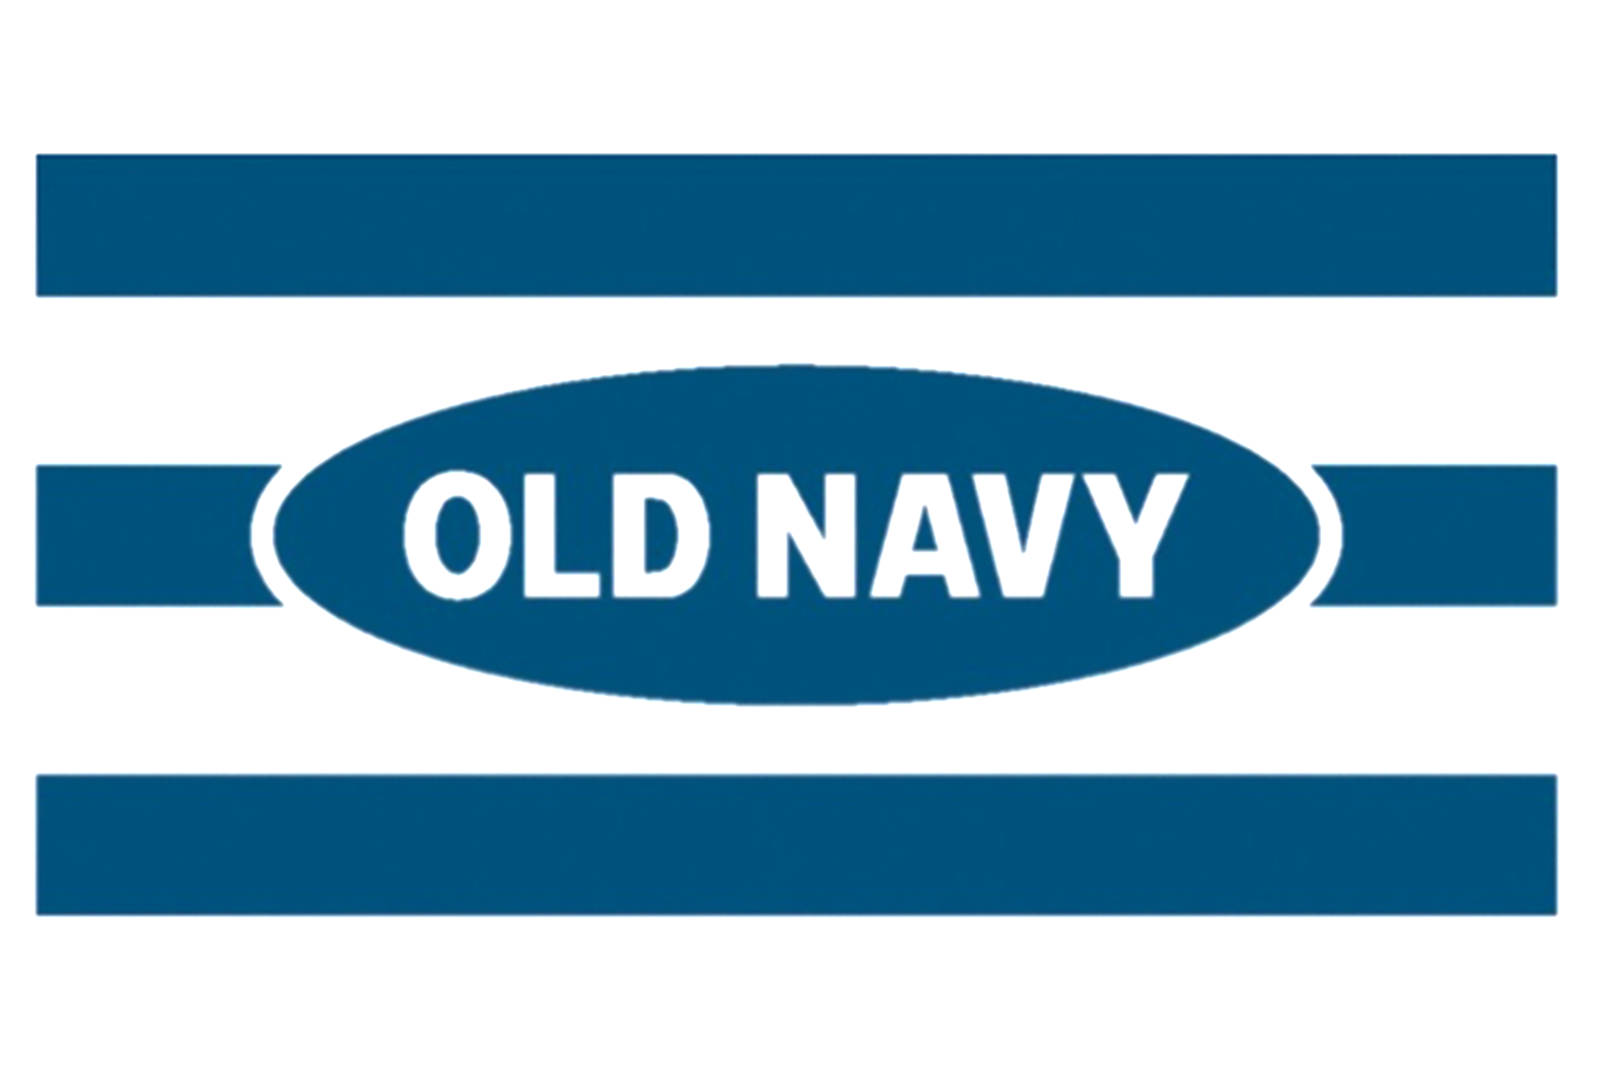 Old Navy Striped Gift Card Wallpaper